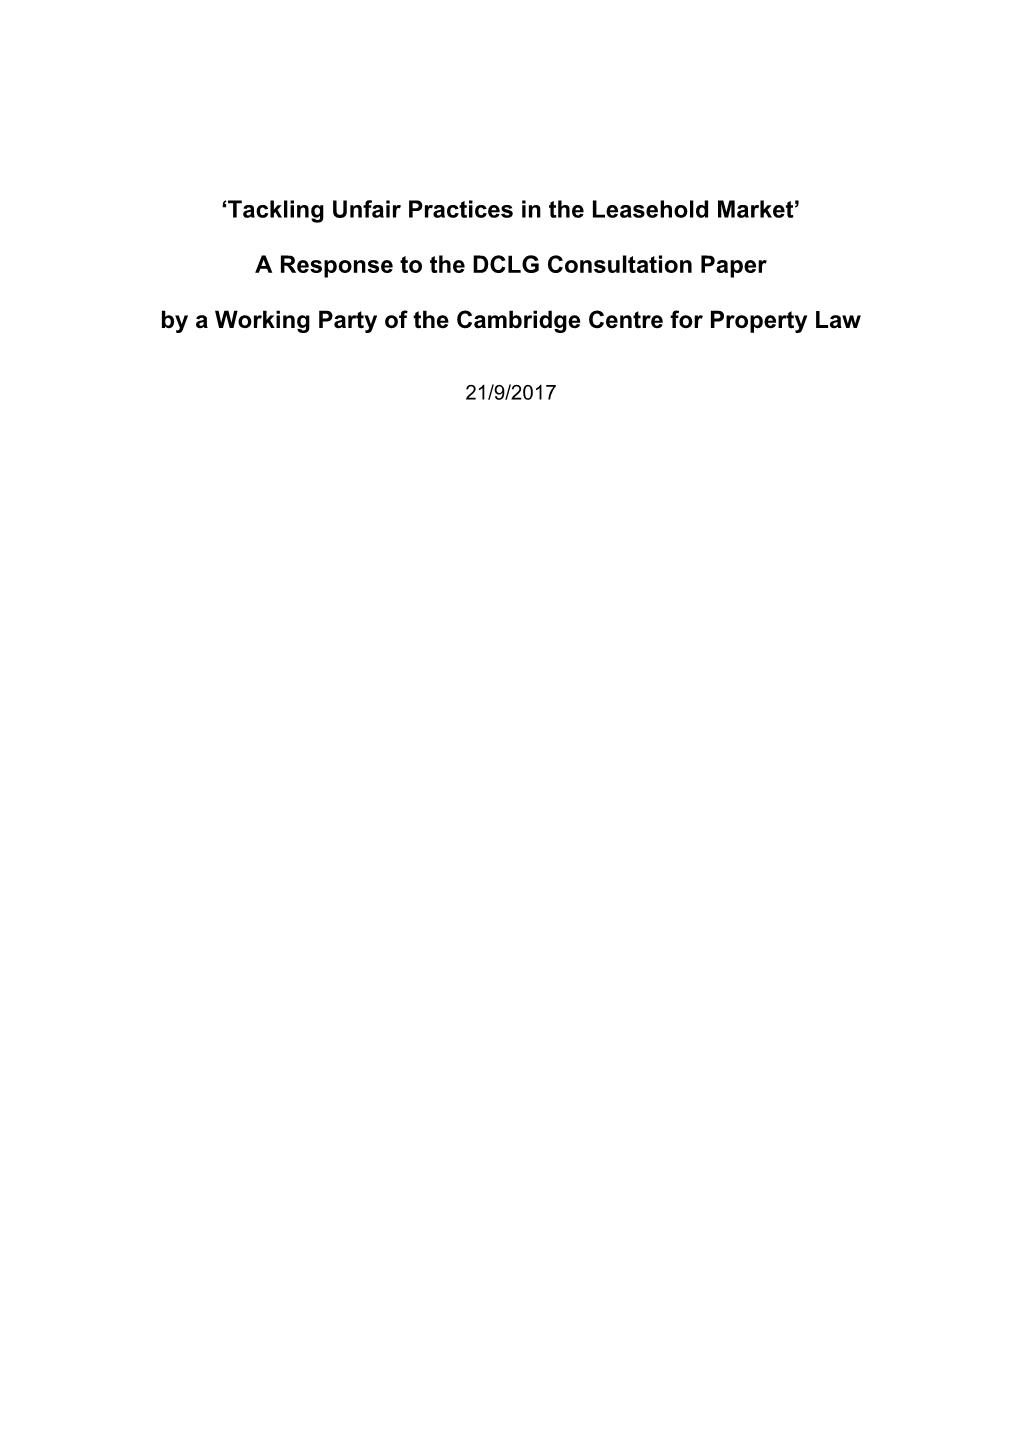 A Response to the DCLG Consultation Paper